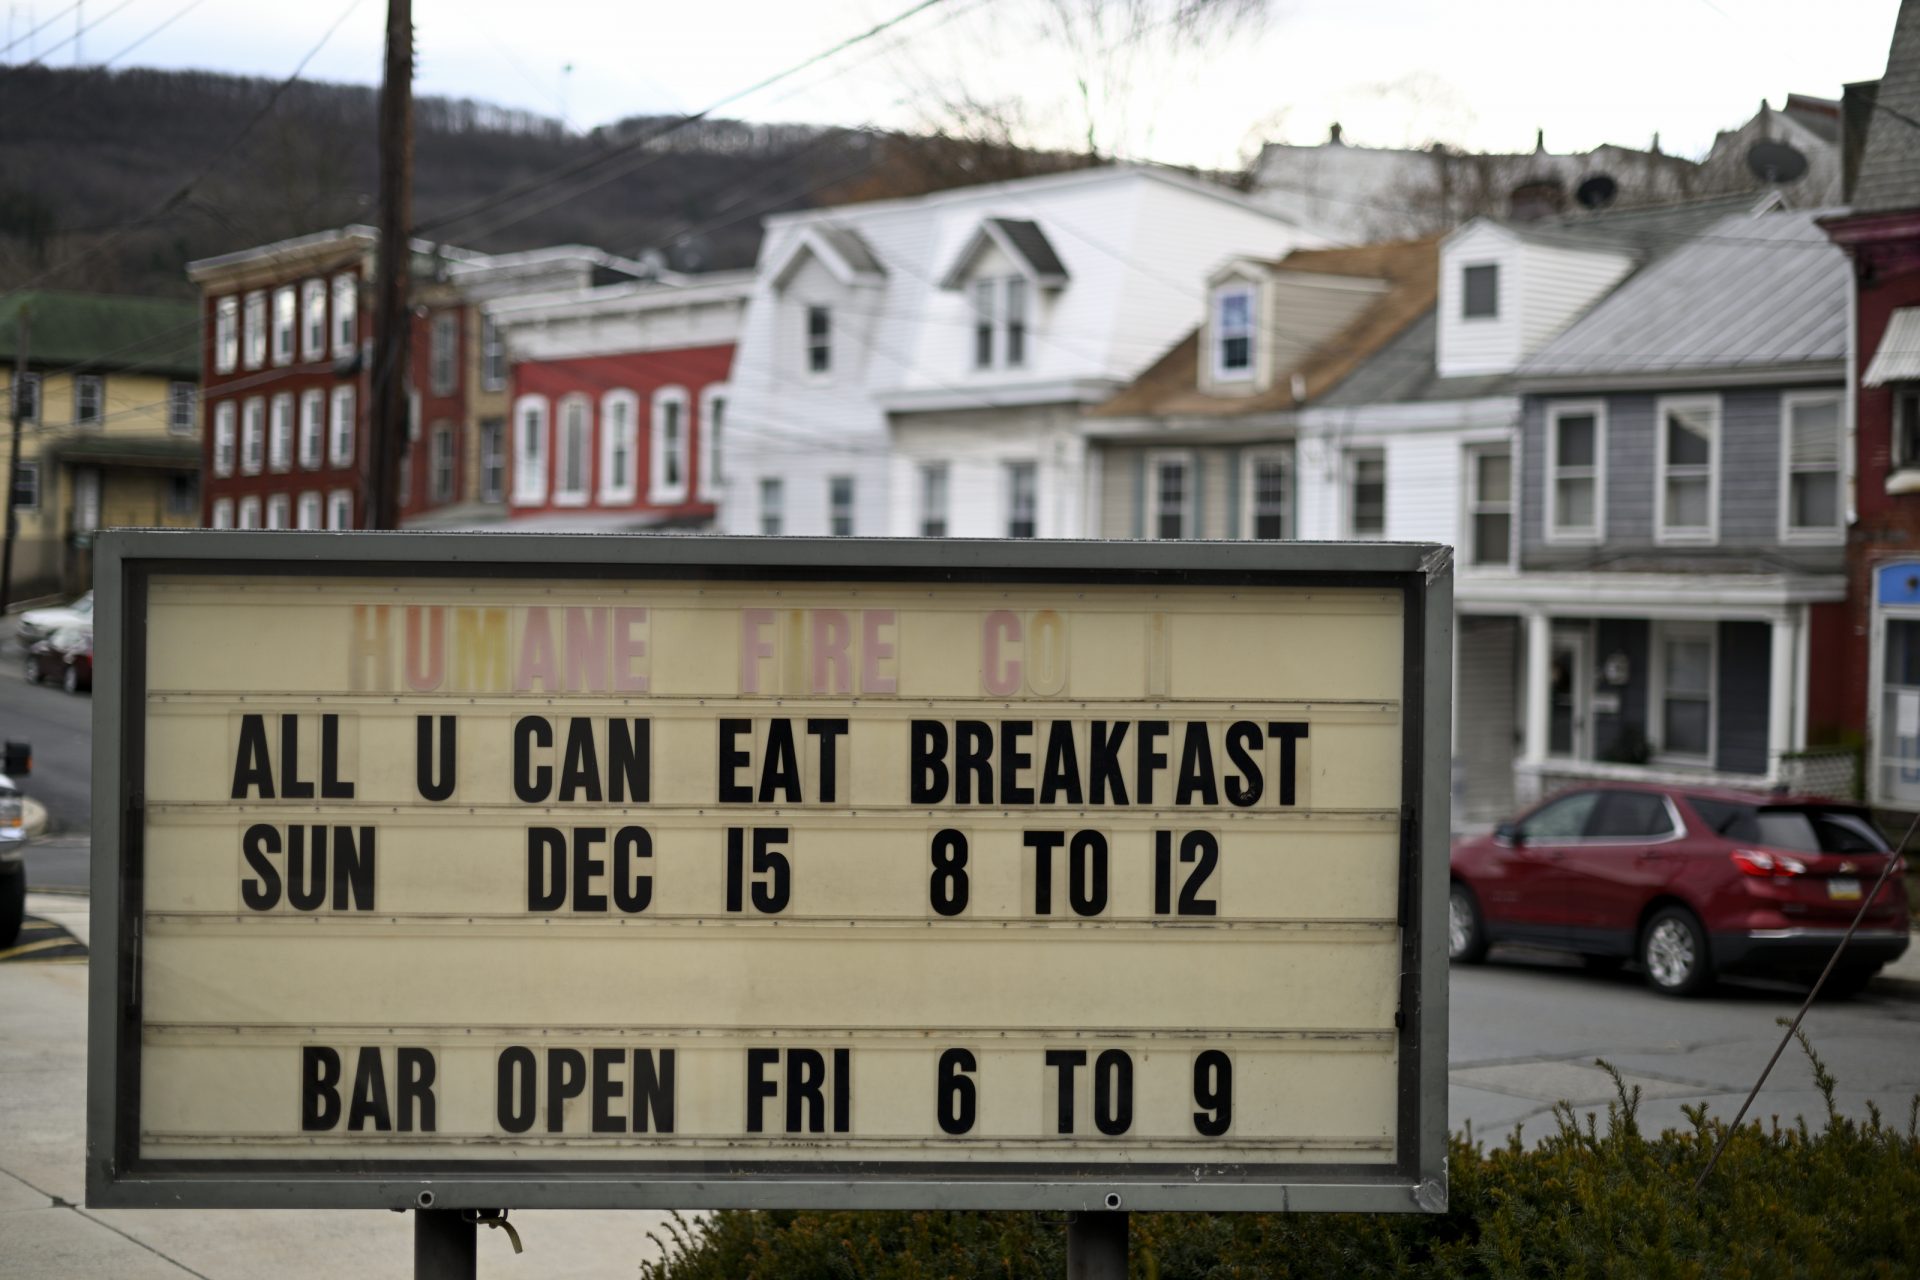 Upcoming social events held at the companies social hall are announced on the board outside Humane Fire Co., in Pottsville, PA, on December 15, 2019.